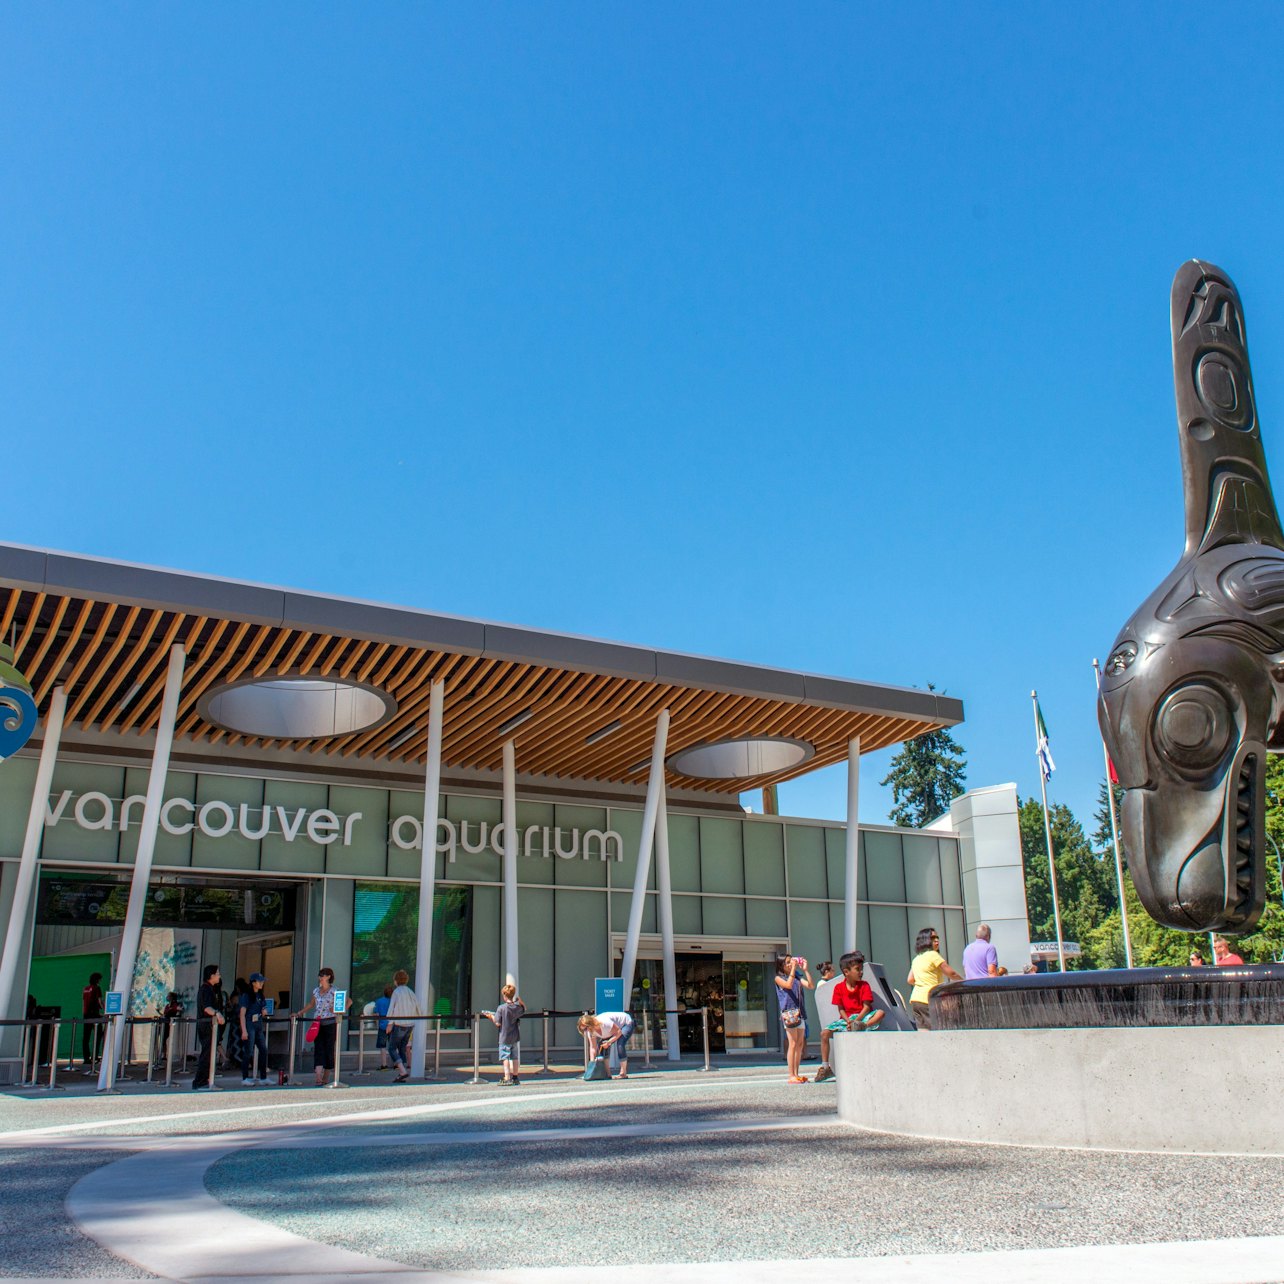 Vancouver Aquarium: Entry Ticket - Accommodations in Vancouver